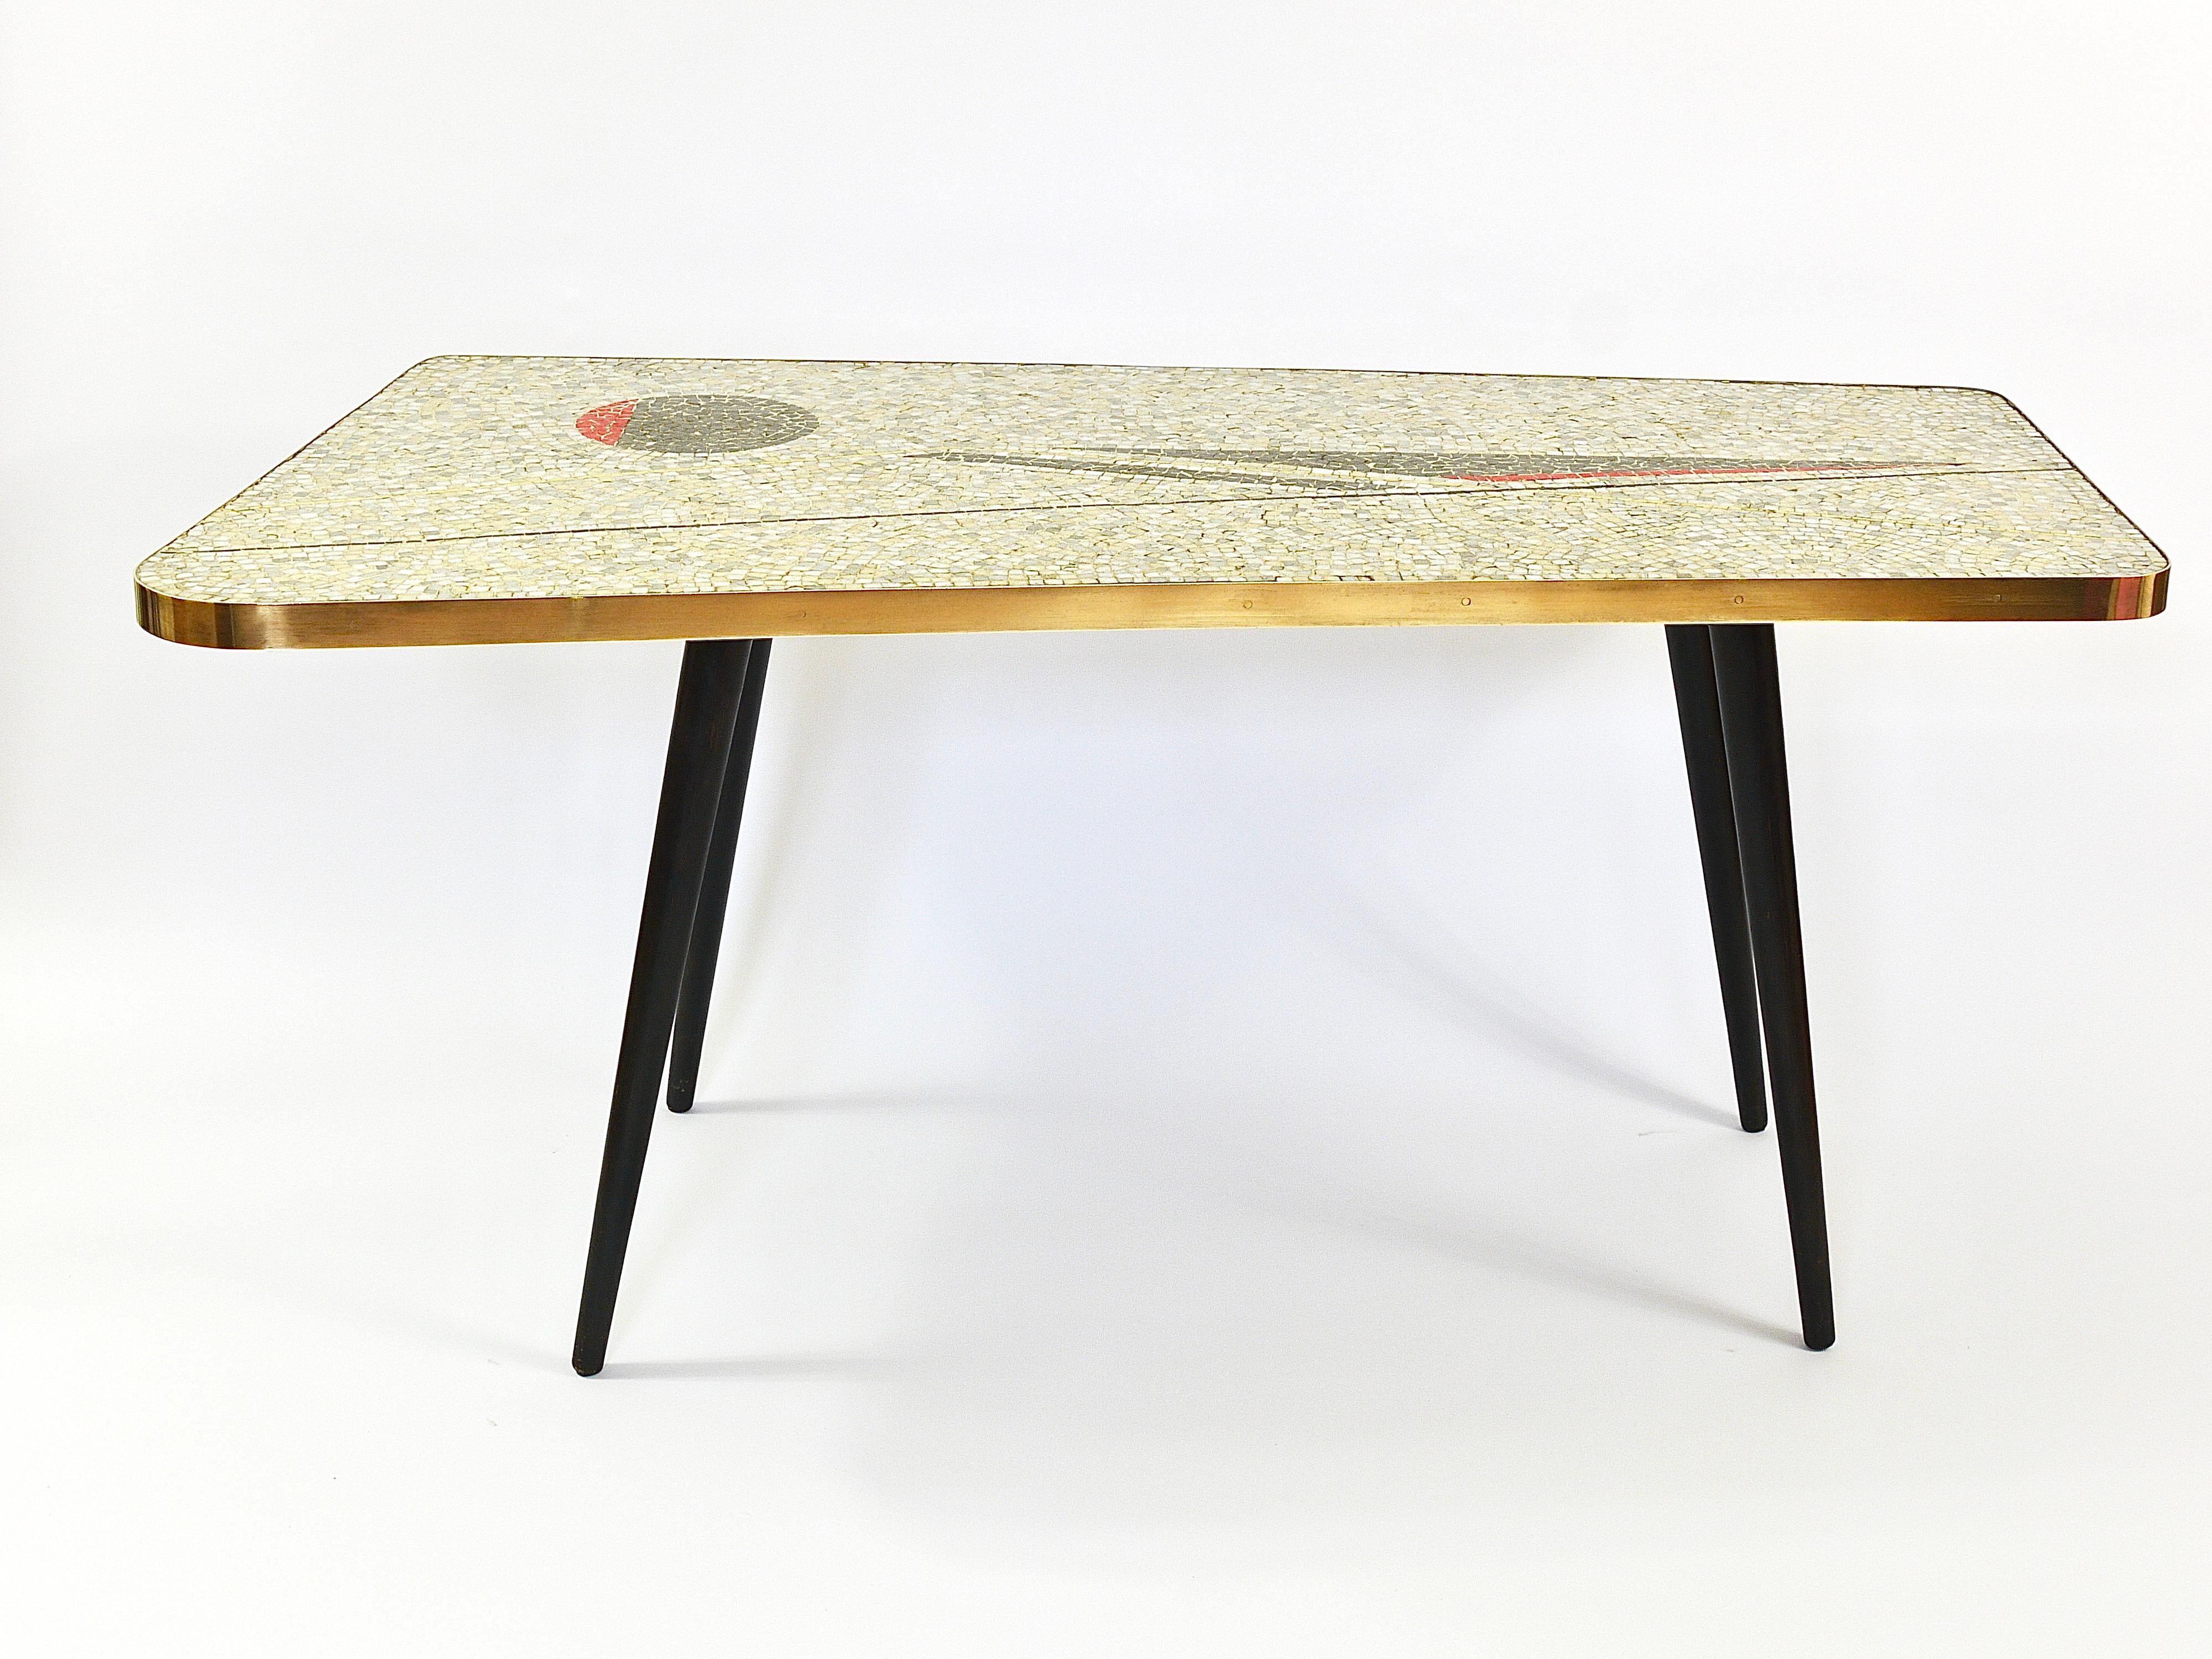 A sculptural Midcentury coffee or cocktail table with a lovely decorative glass tiles mosaic top, showing beautiful graphic shapes. Created by designer and artist Berthold Müller - Oerlinghausen (1893-1979), Germany. This unique sofa table has a